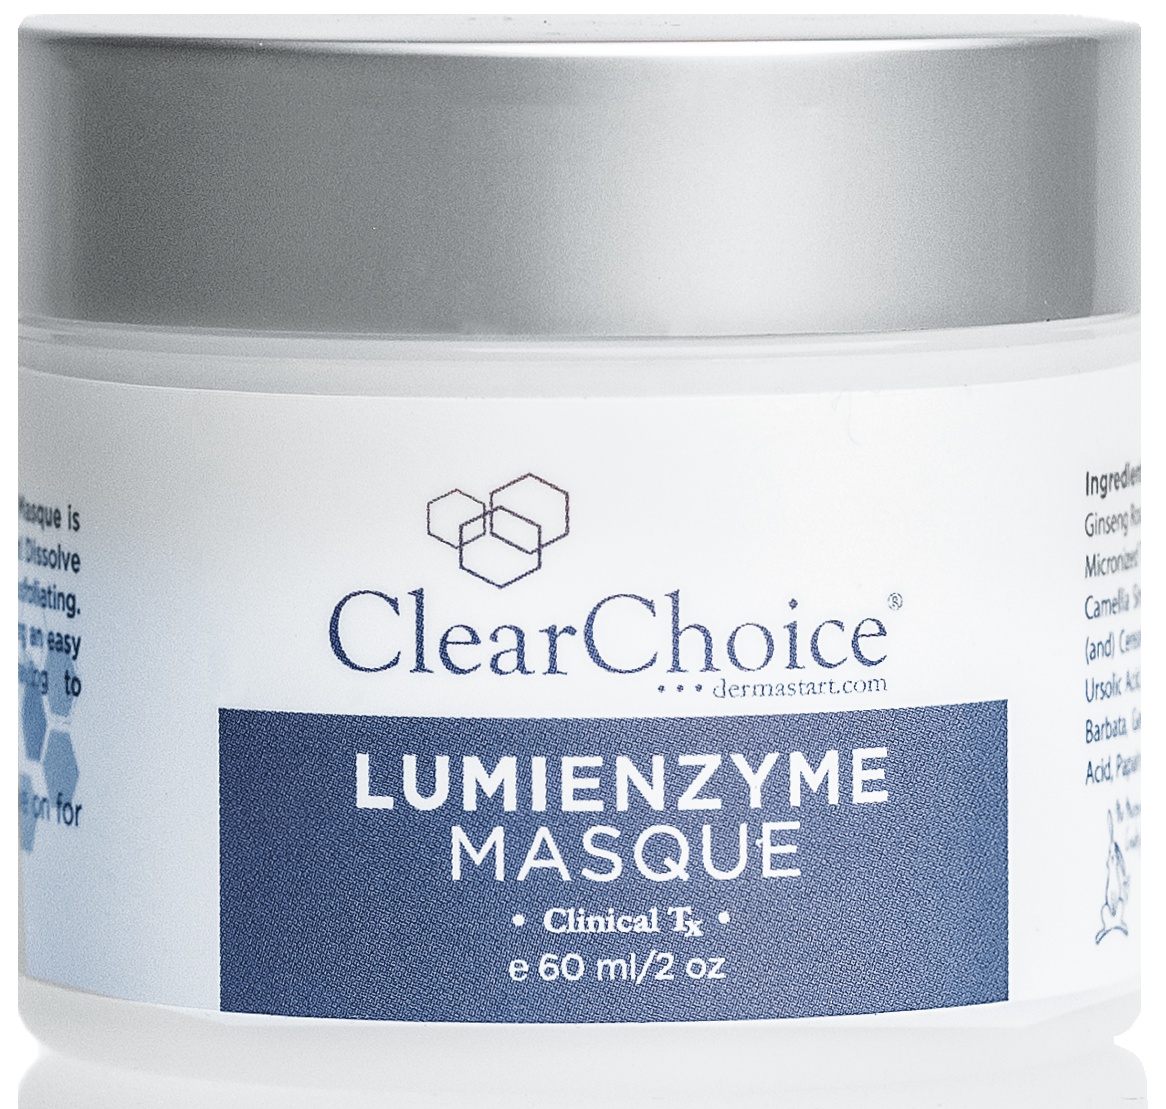 ClearChoice Lumienzyme Masque